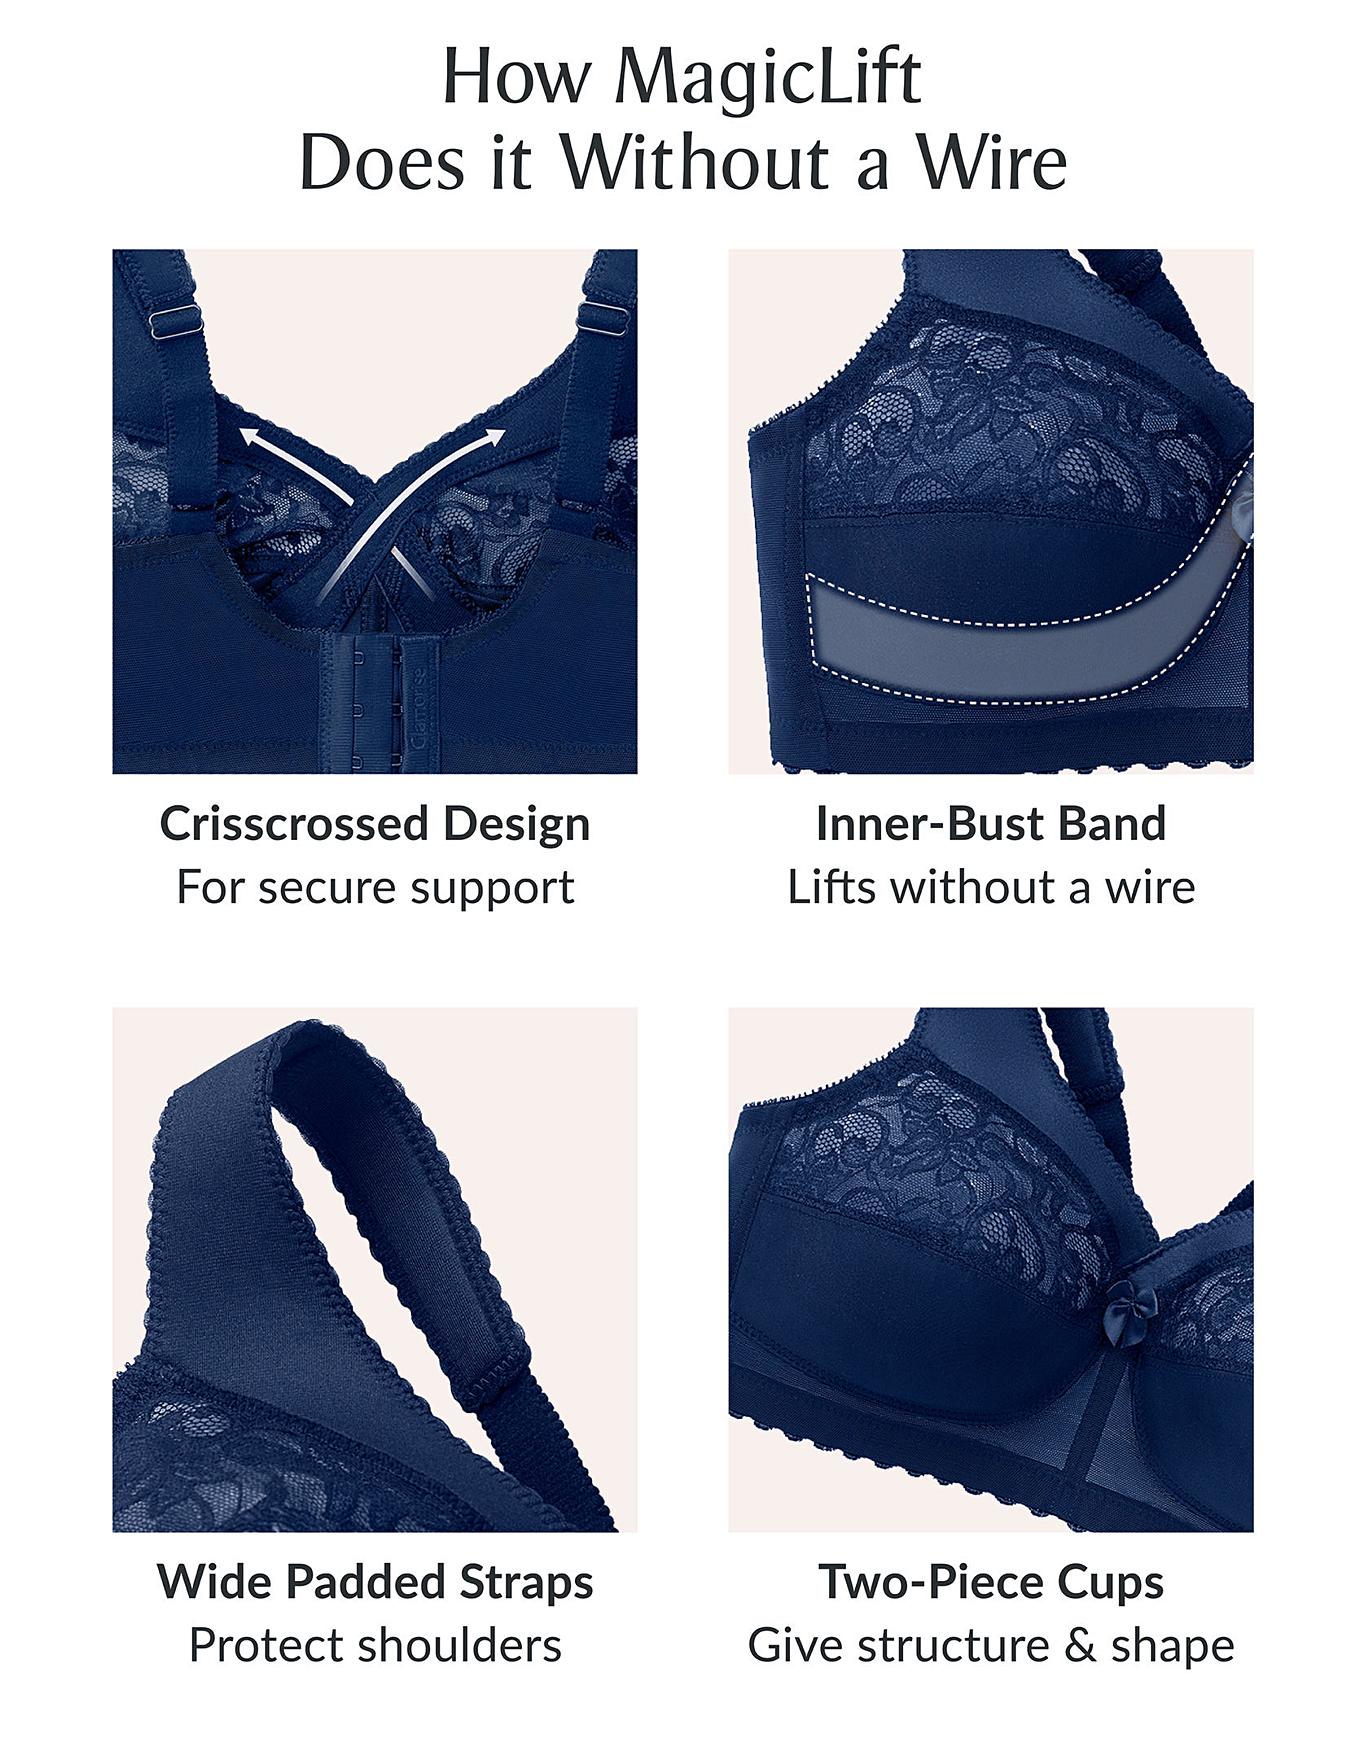 Dale and Waters - Feel the Magic! Our best selling bra is available for pre- order! All our bras are now available to pre-order. GL1000 Feel The Magic  Support Bra by Glamorise is